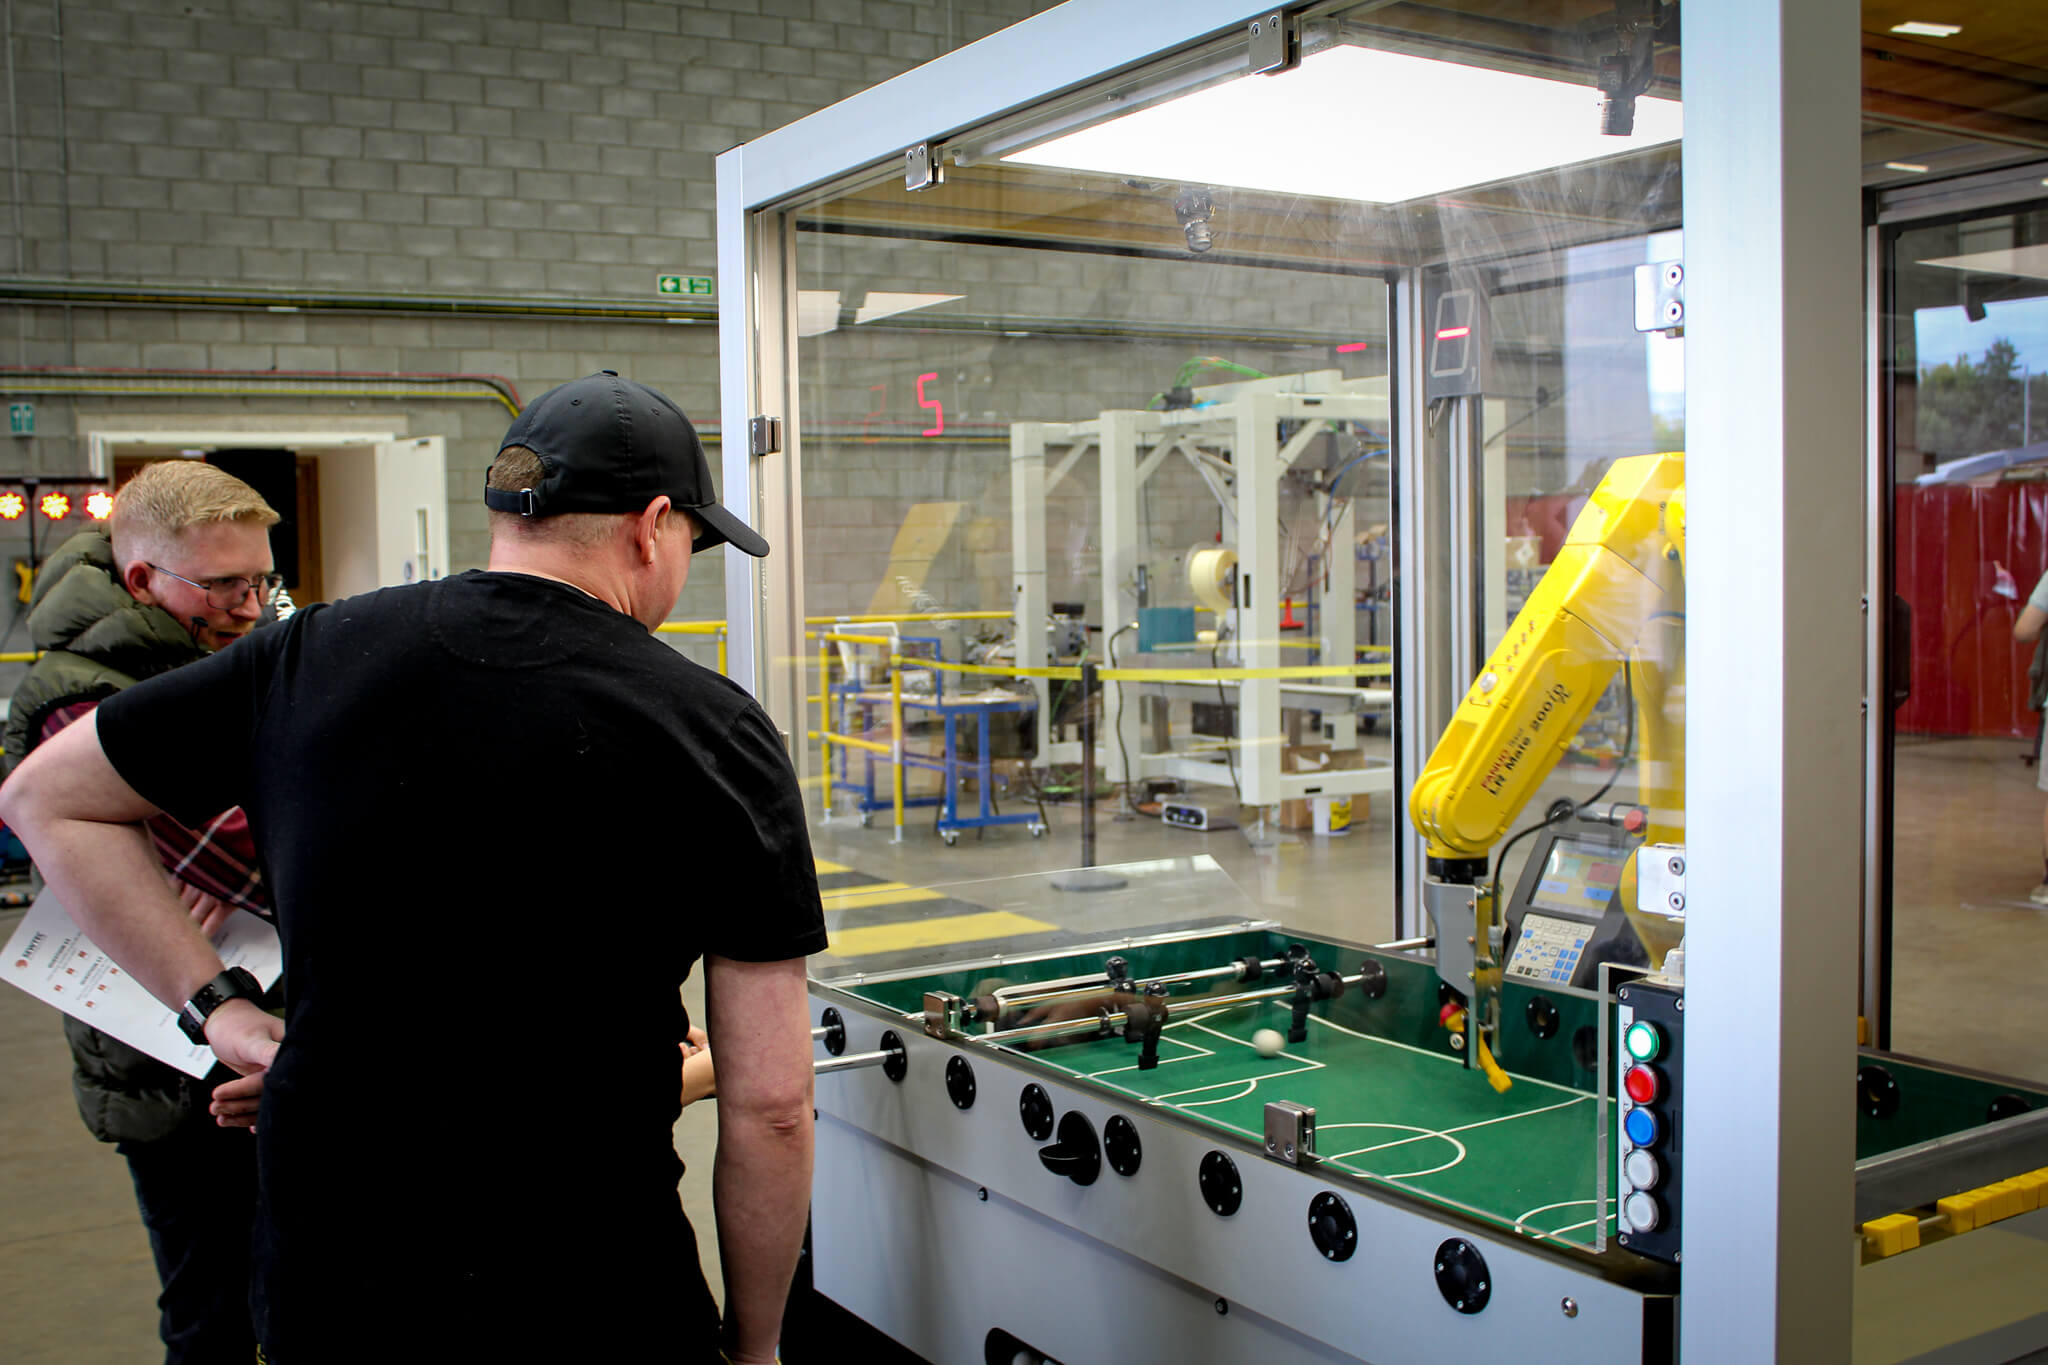 Two team members playing against a robot at table football